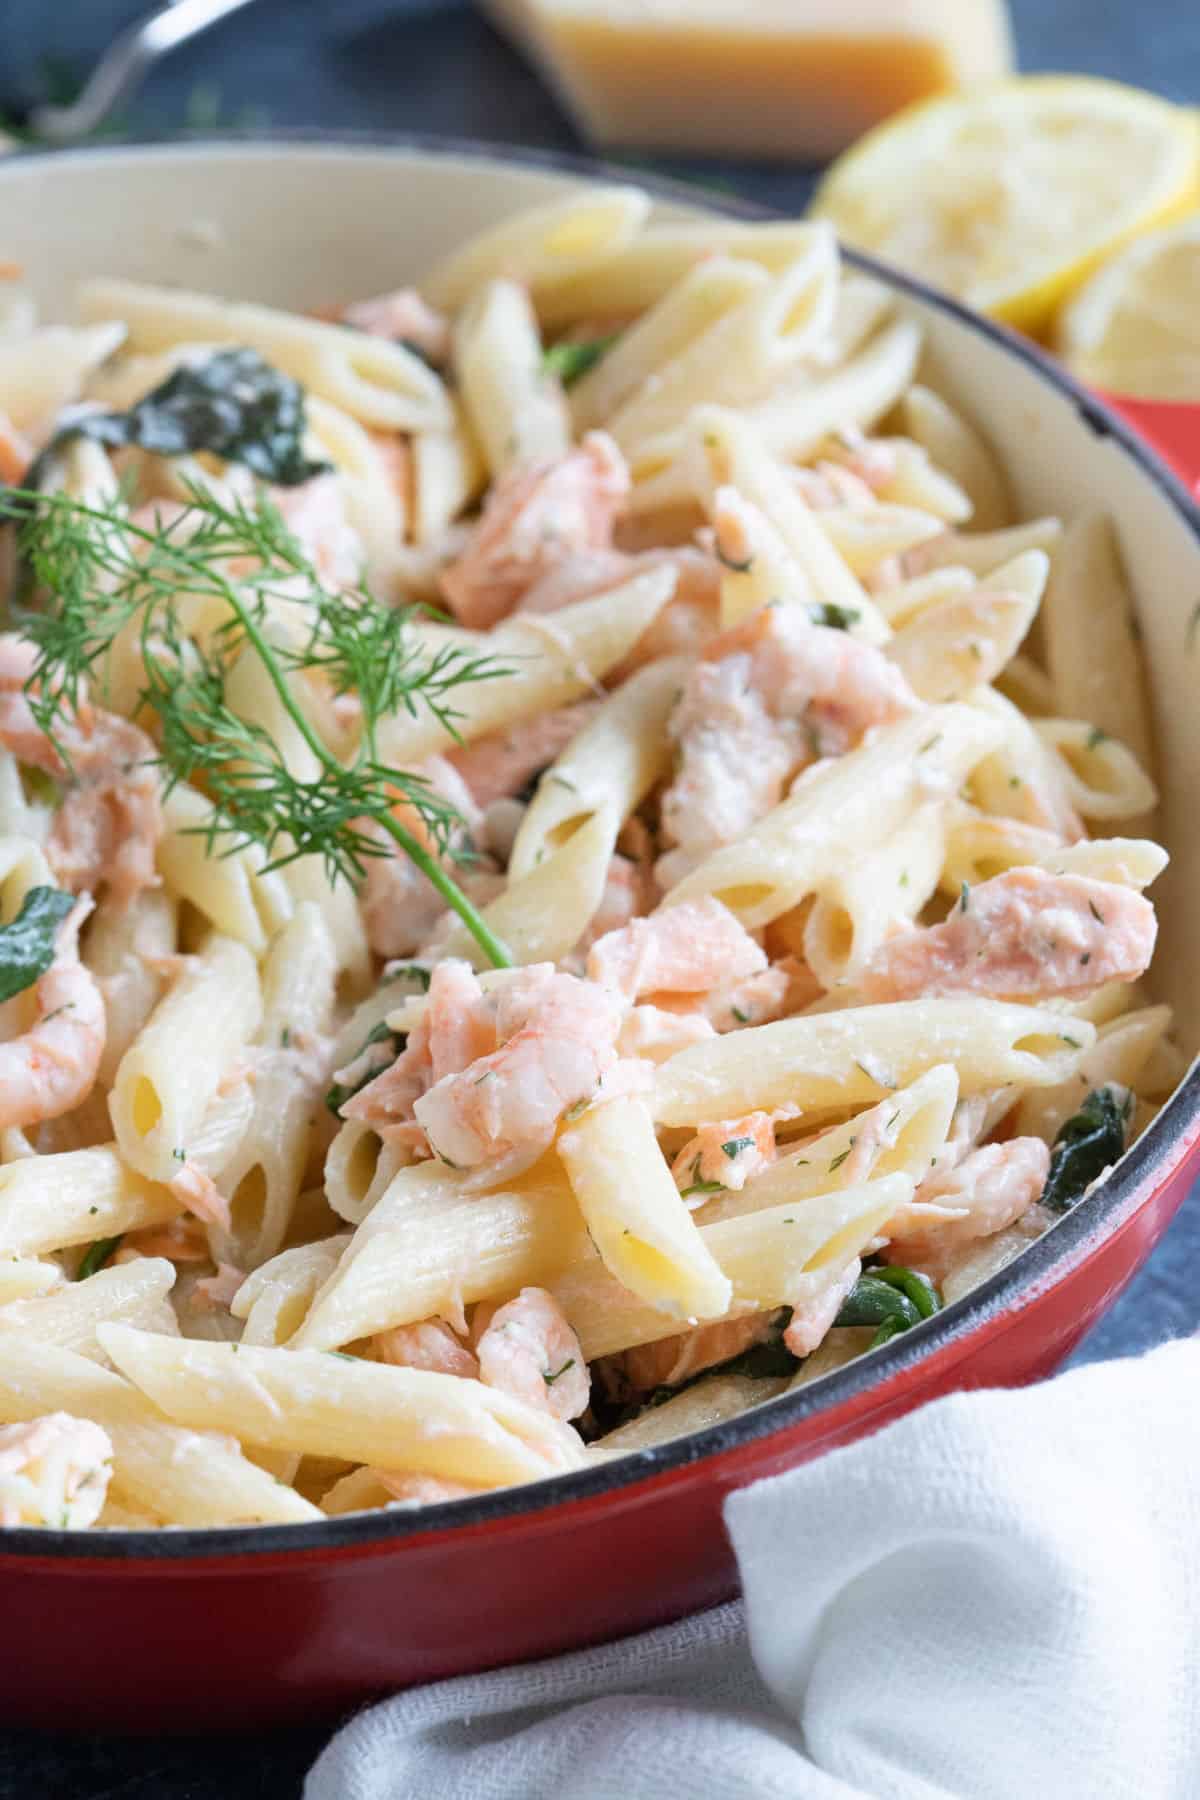 Salmon and prawn pasta in a red pan.